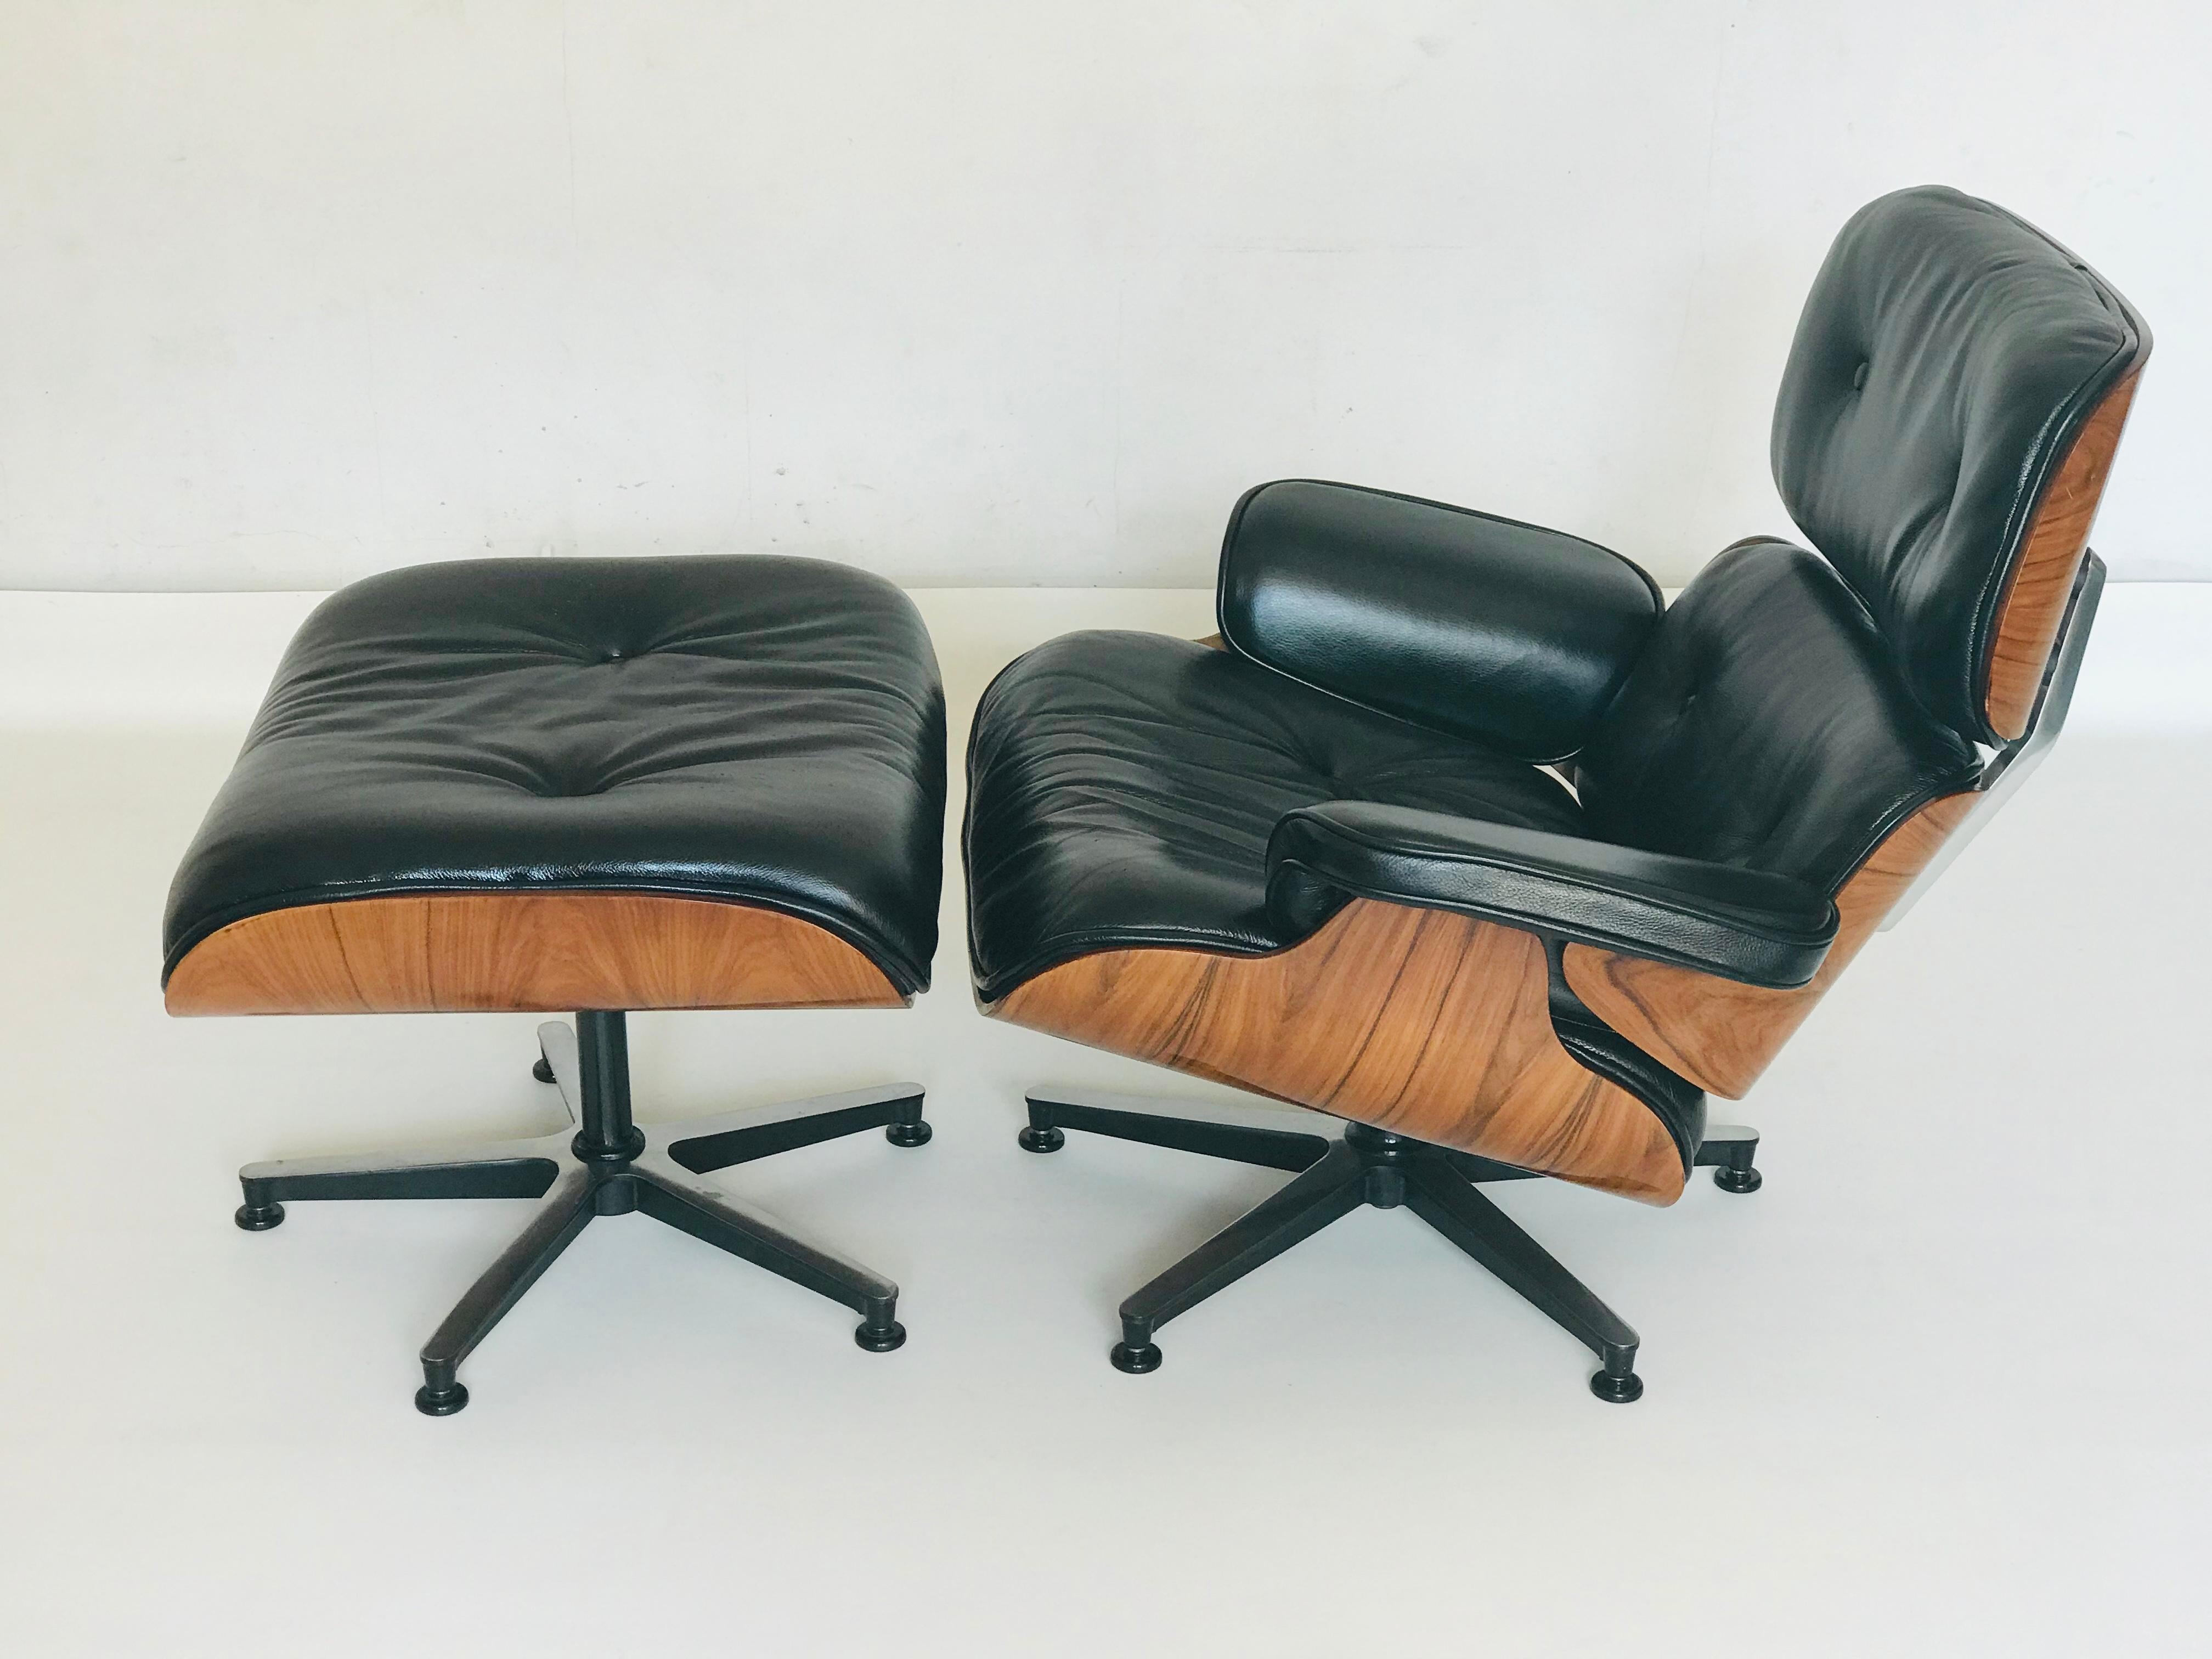 American Set of Charles Ray Eames Lounge Chair and Ottoman 670 and 671, Black Leather For Sale